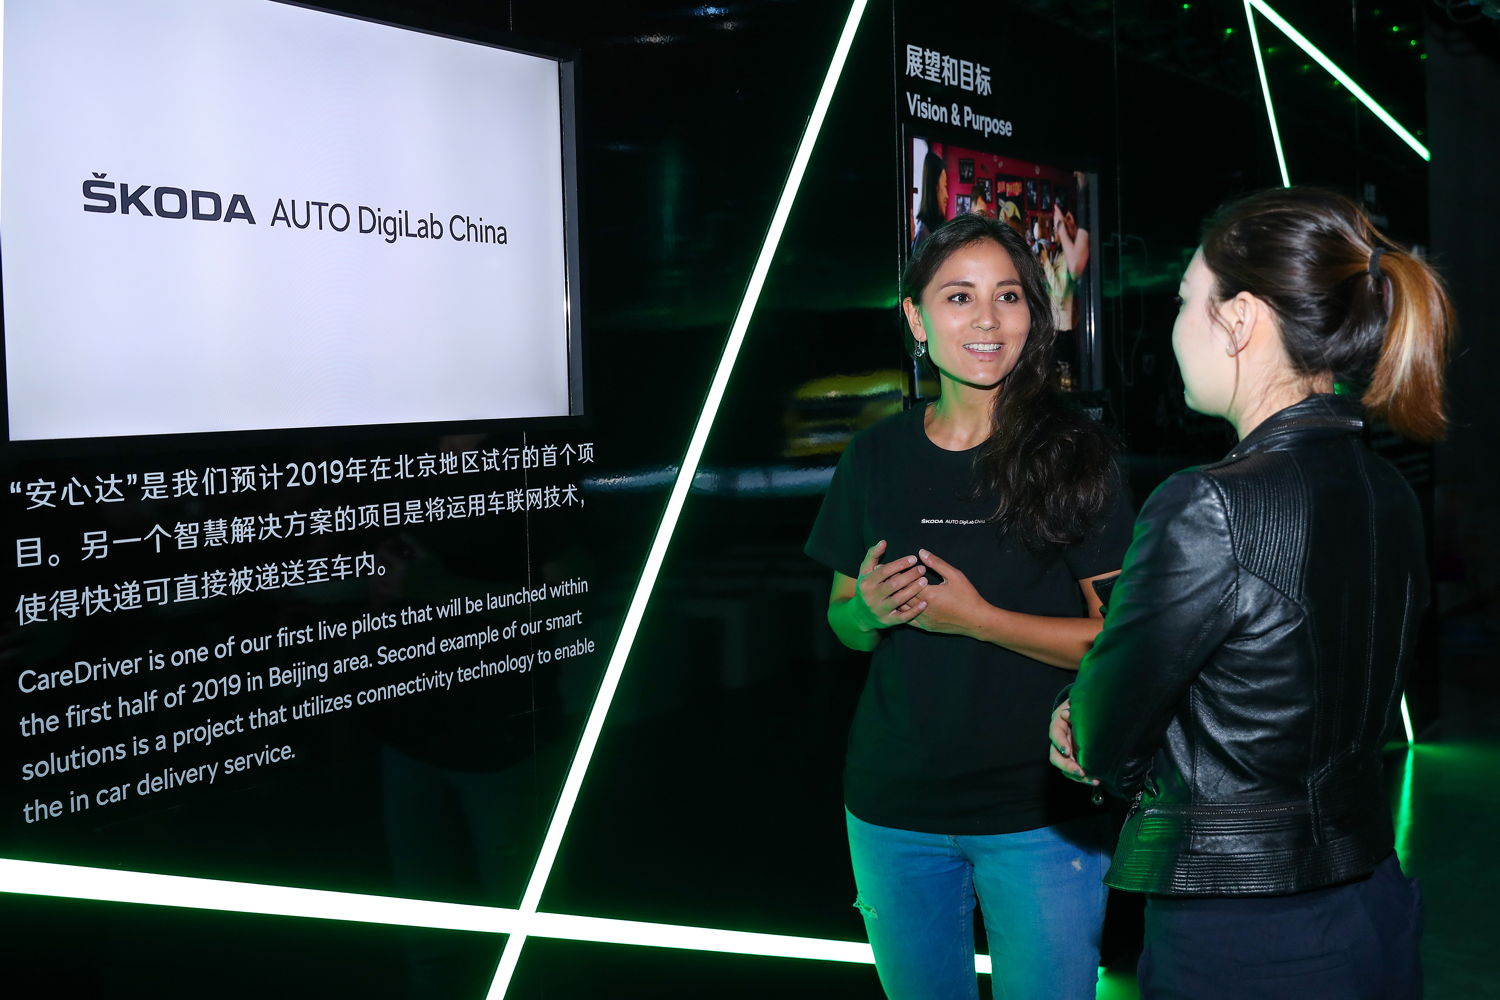 Having set up the new ŠKODA AUTO DigiLab China, the car manufacturer now also has a platform in its largest single market in the world for developing new digital services and mobility solutions together with top local start-ups and creative talent.